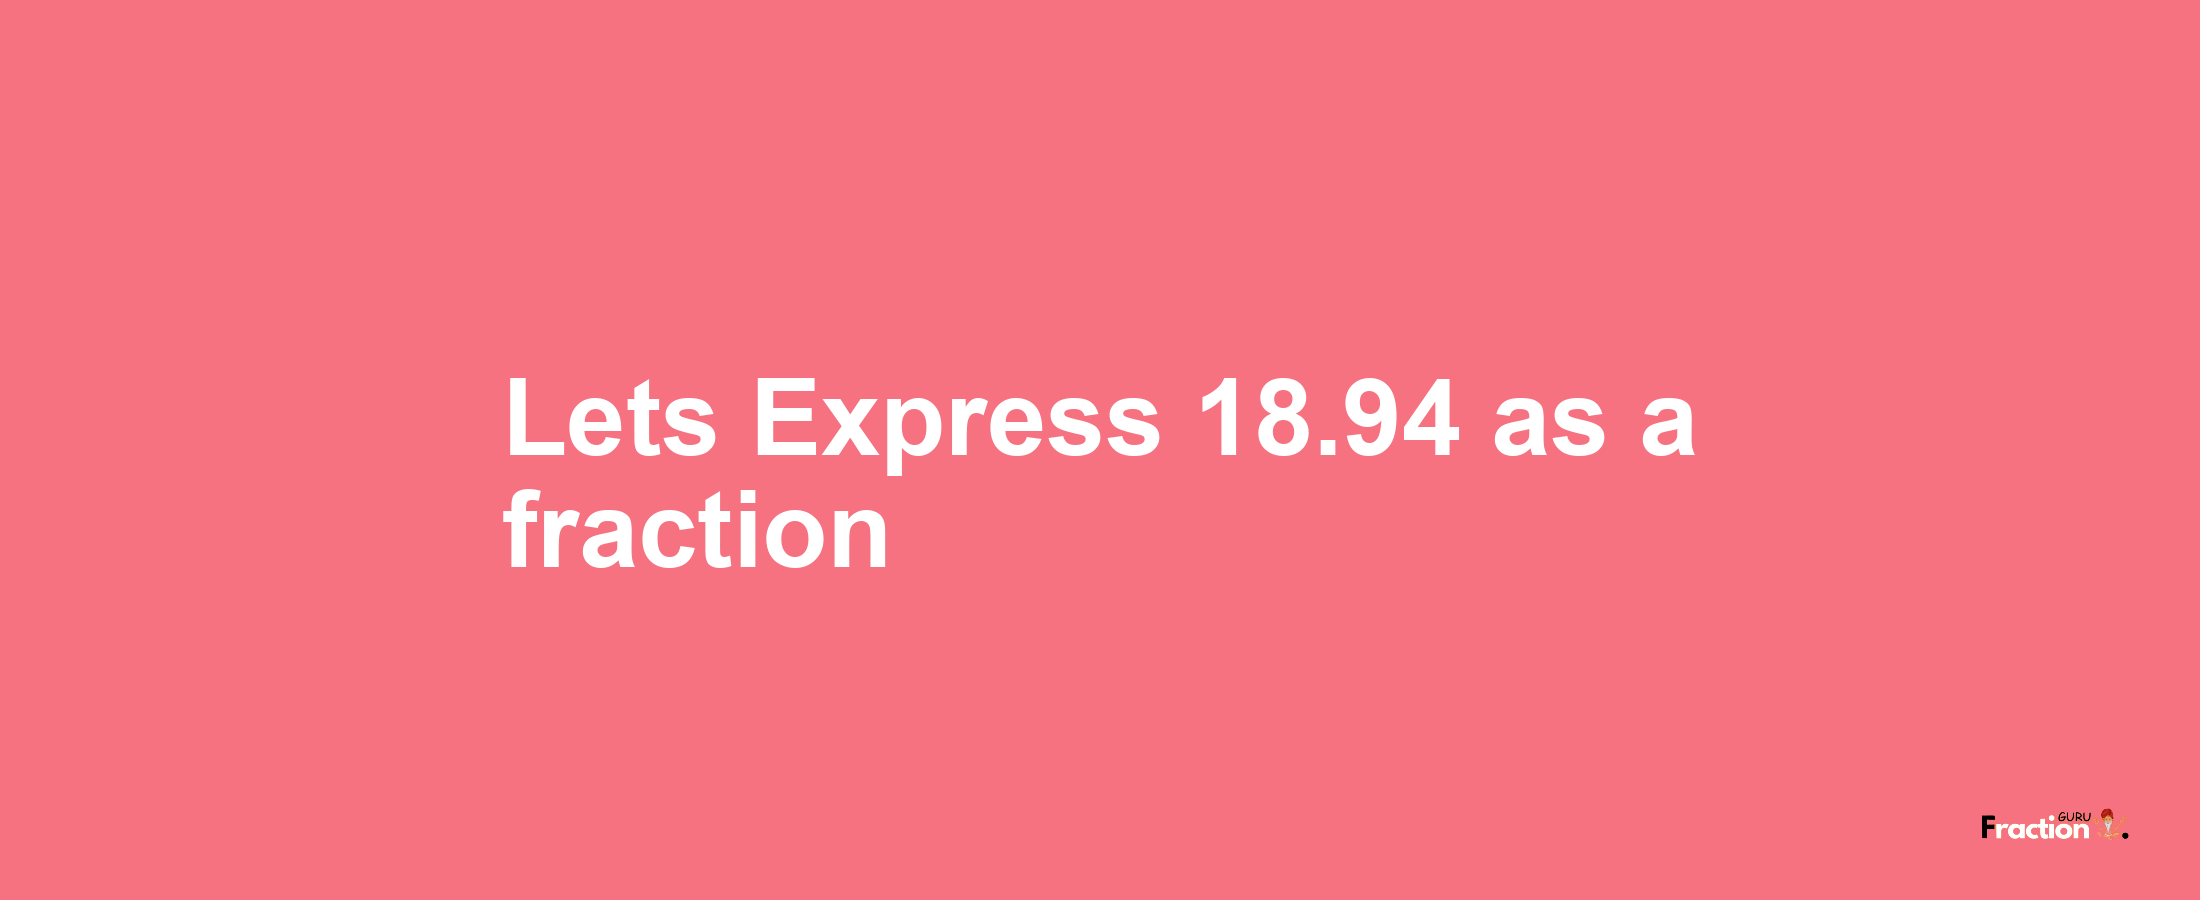 Lets Express 18.94 as afraction